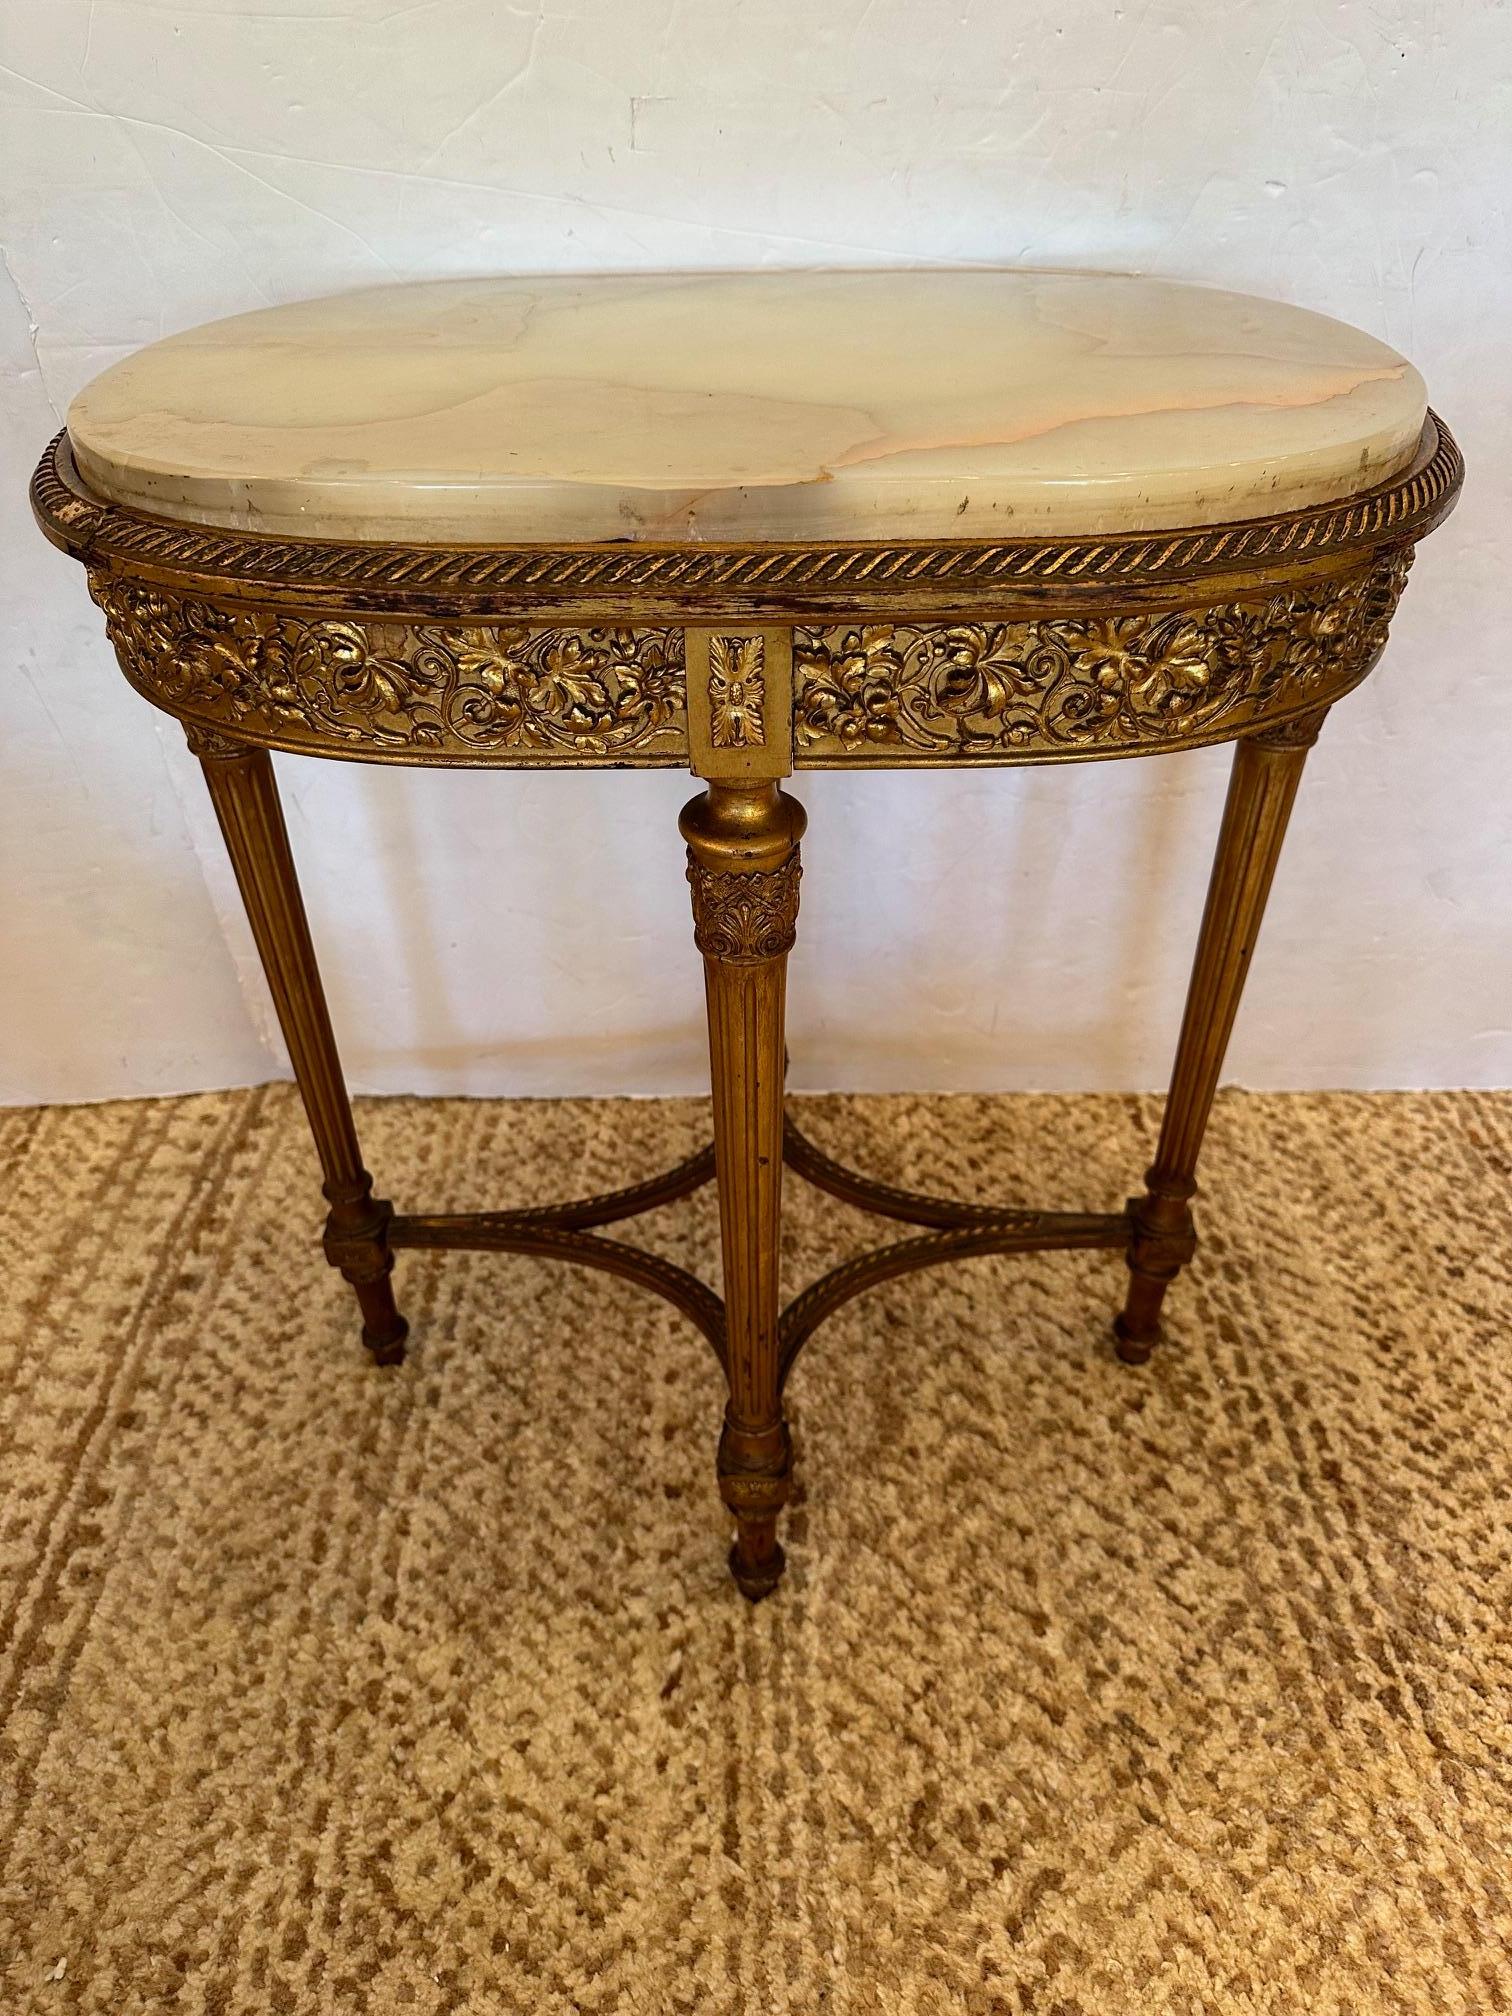 19th Century Ornate French Louis XVI Style Giltwood Oval Side Table with Marble Top For Sale